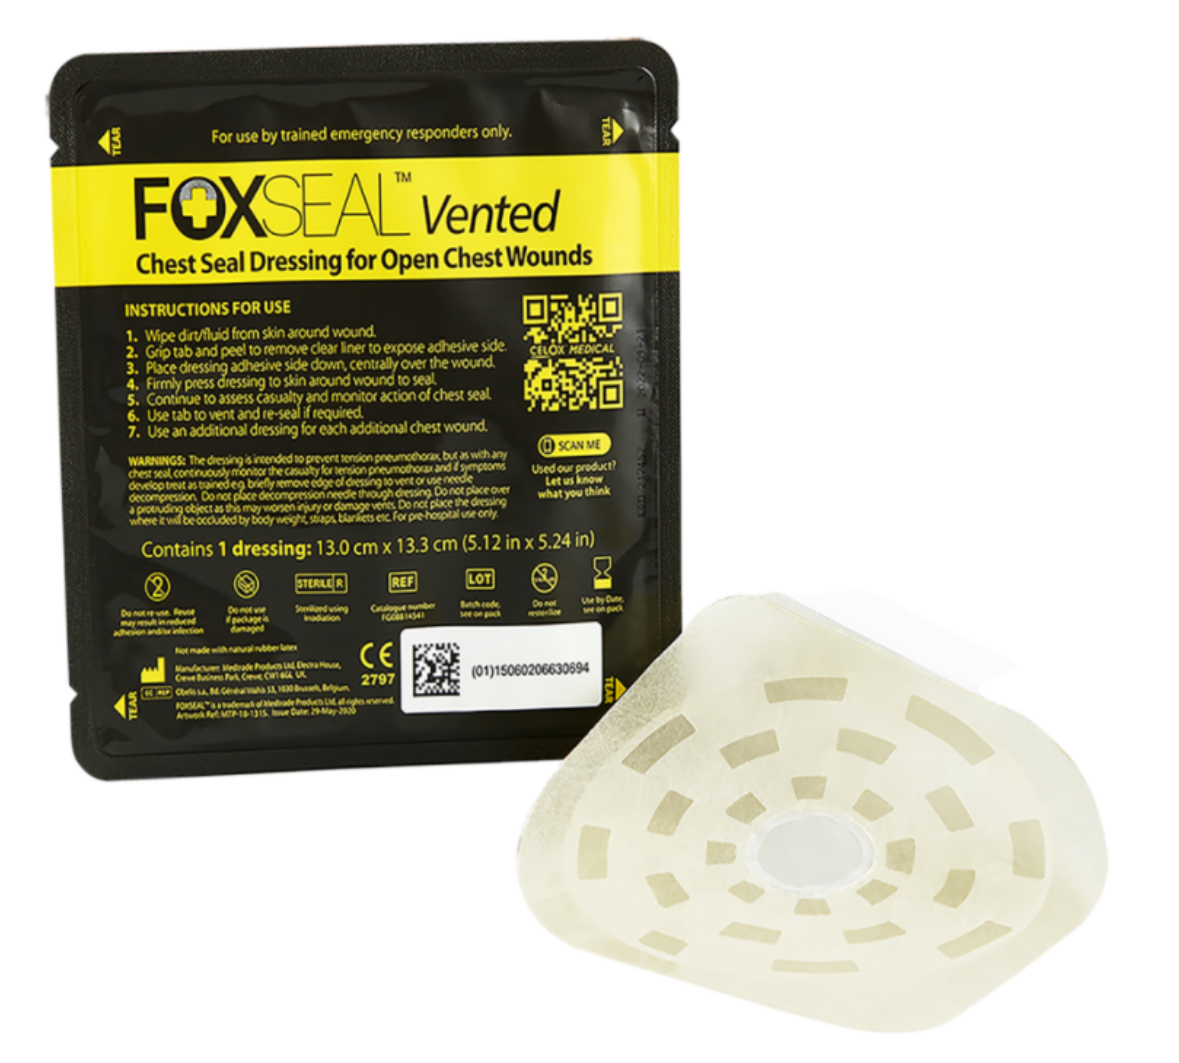 FOXSEAL VENTED CHEST SEAL